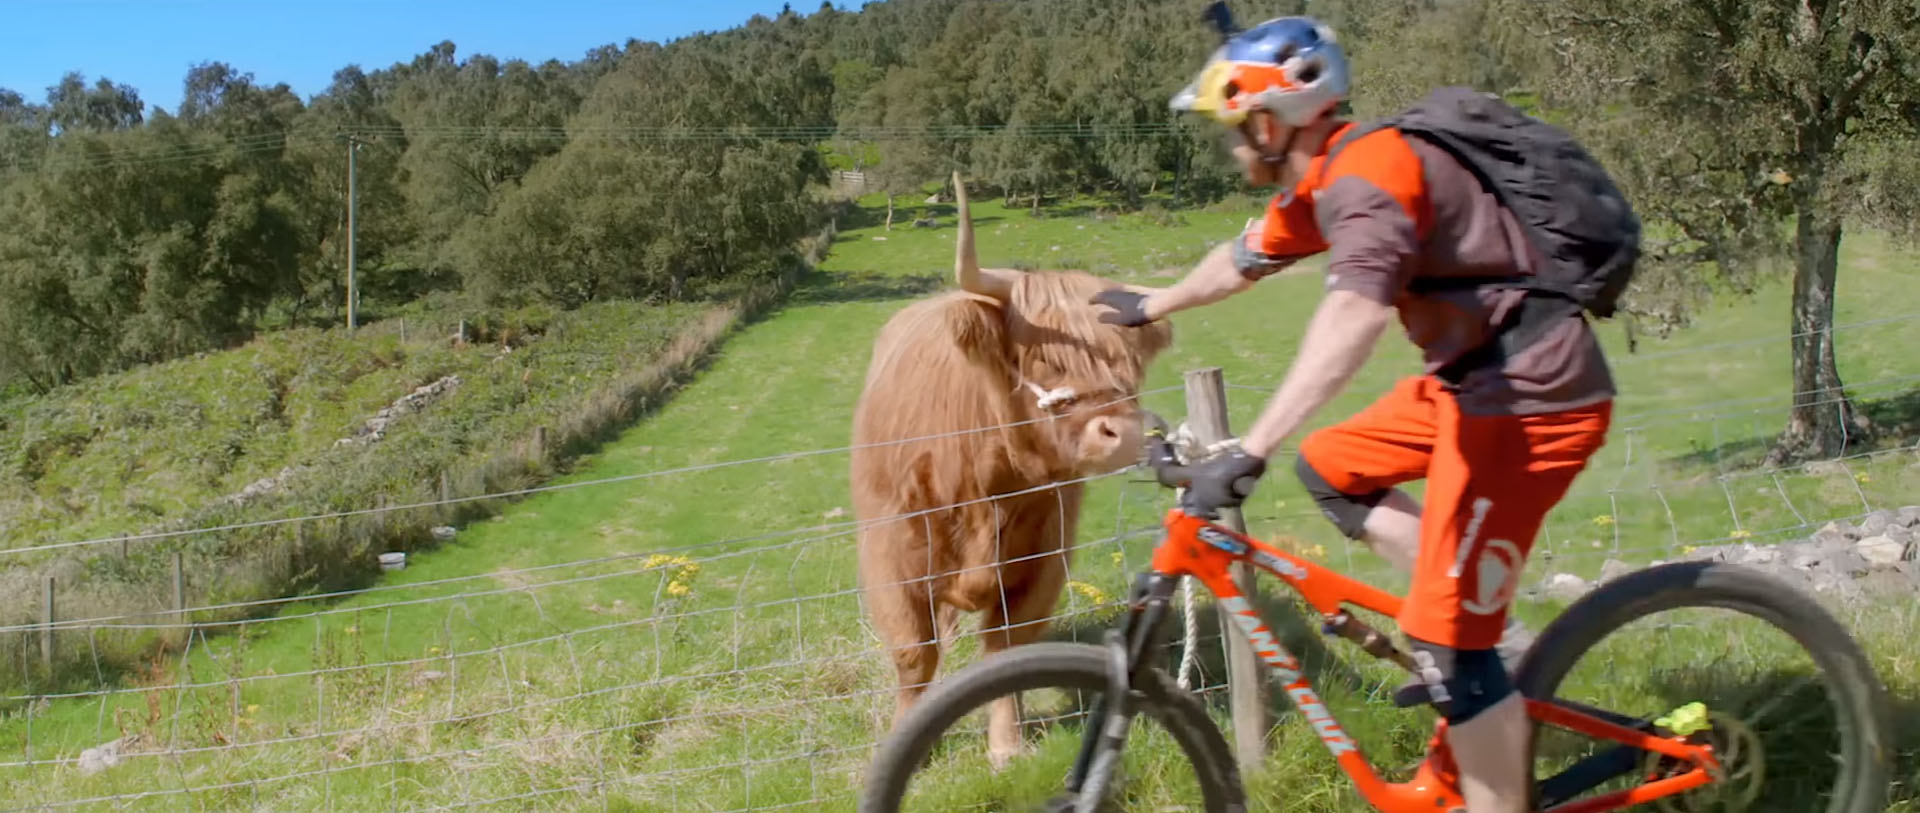 Danny MacAskill's Latest Clip Is a Tourism Brochure for